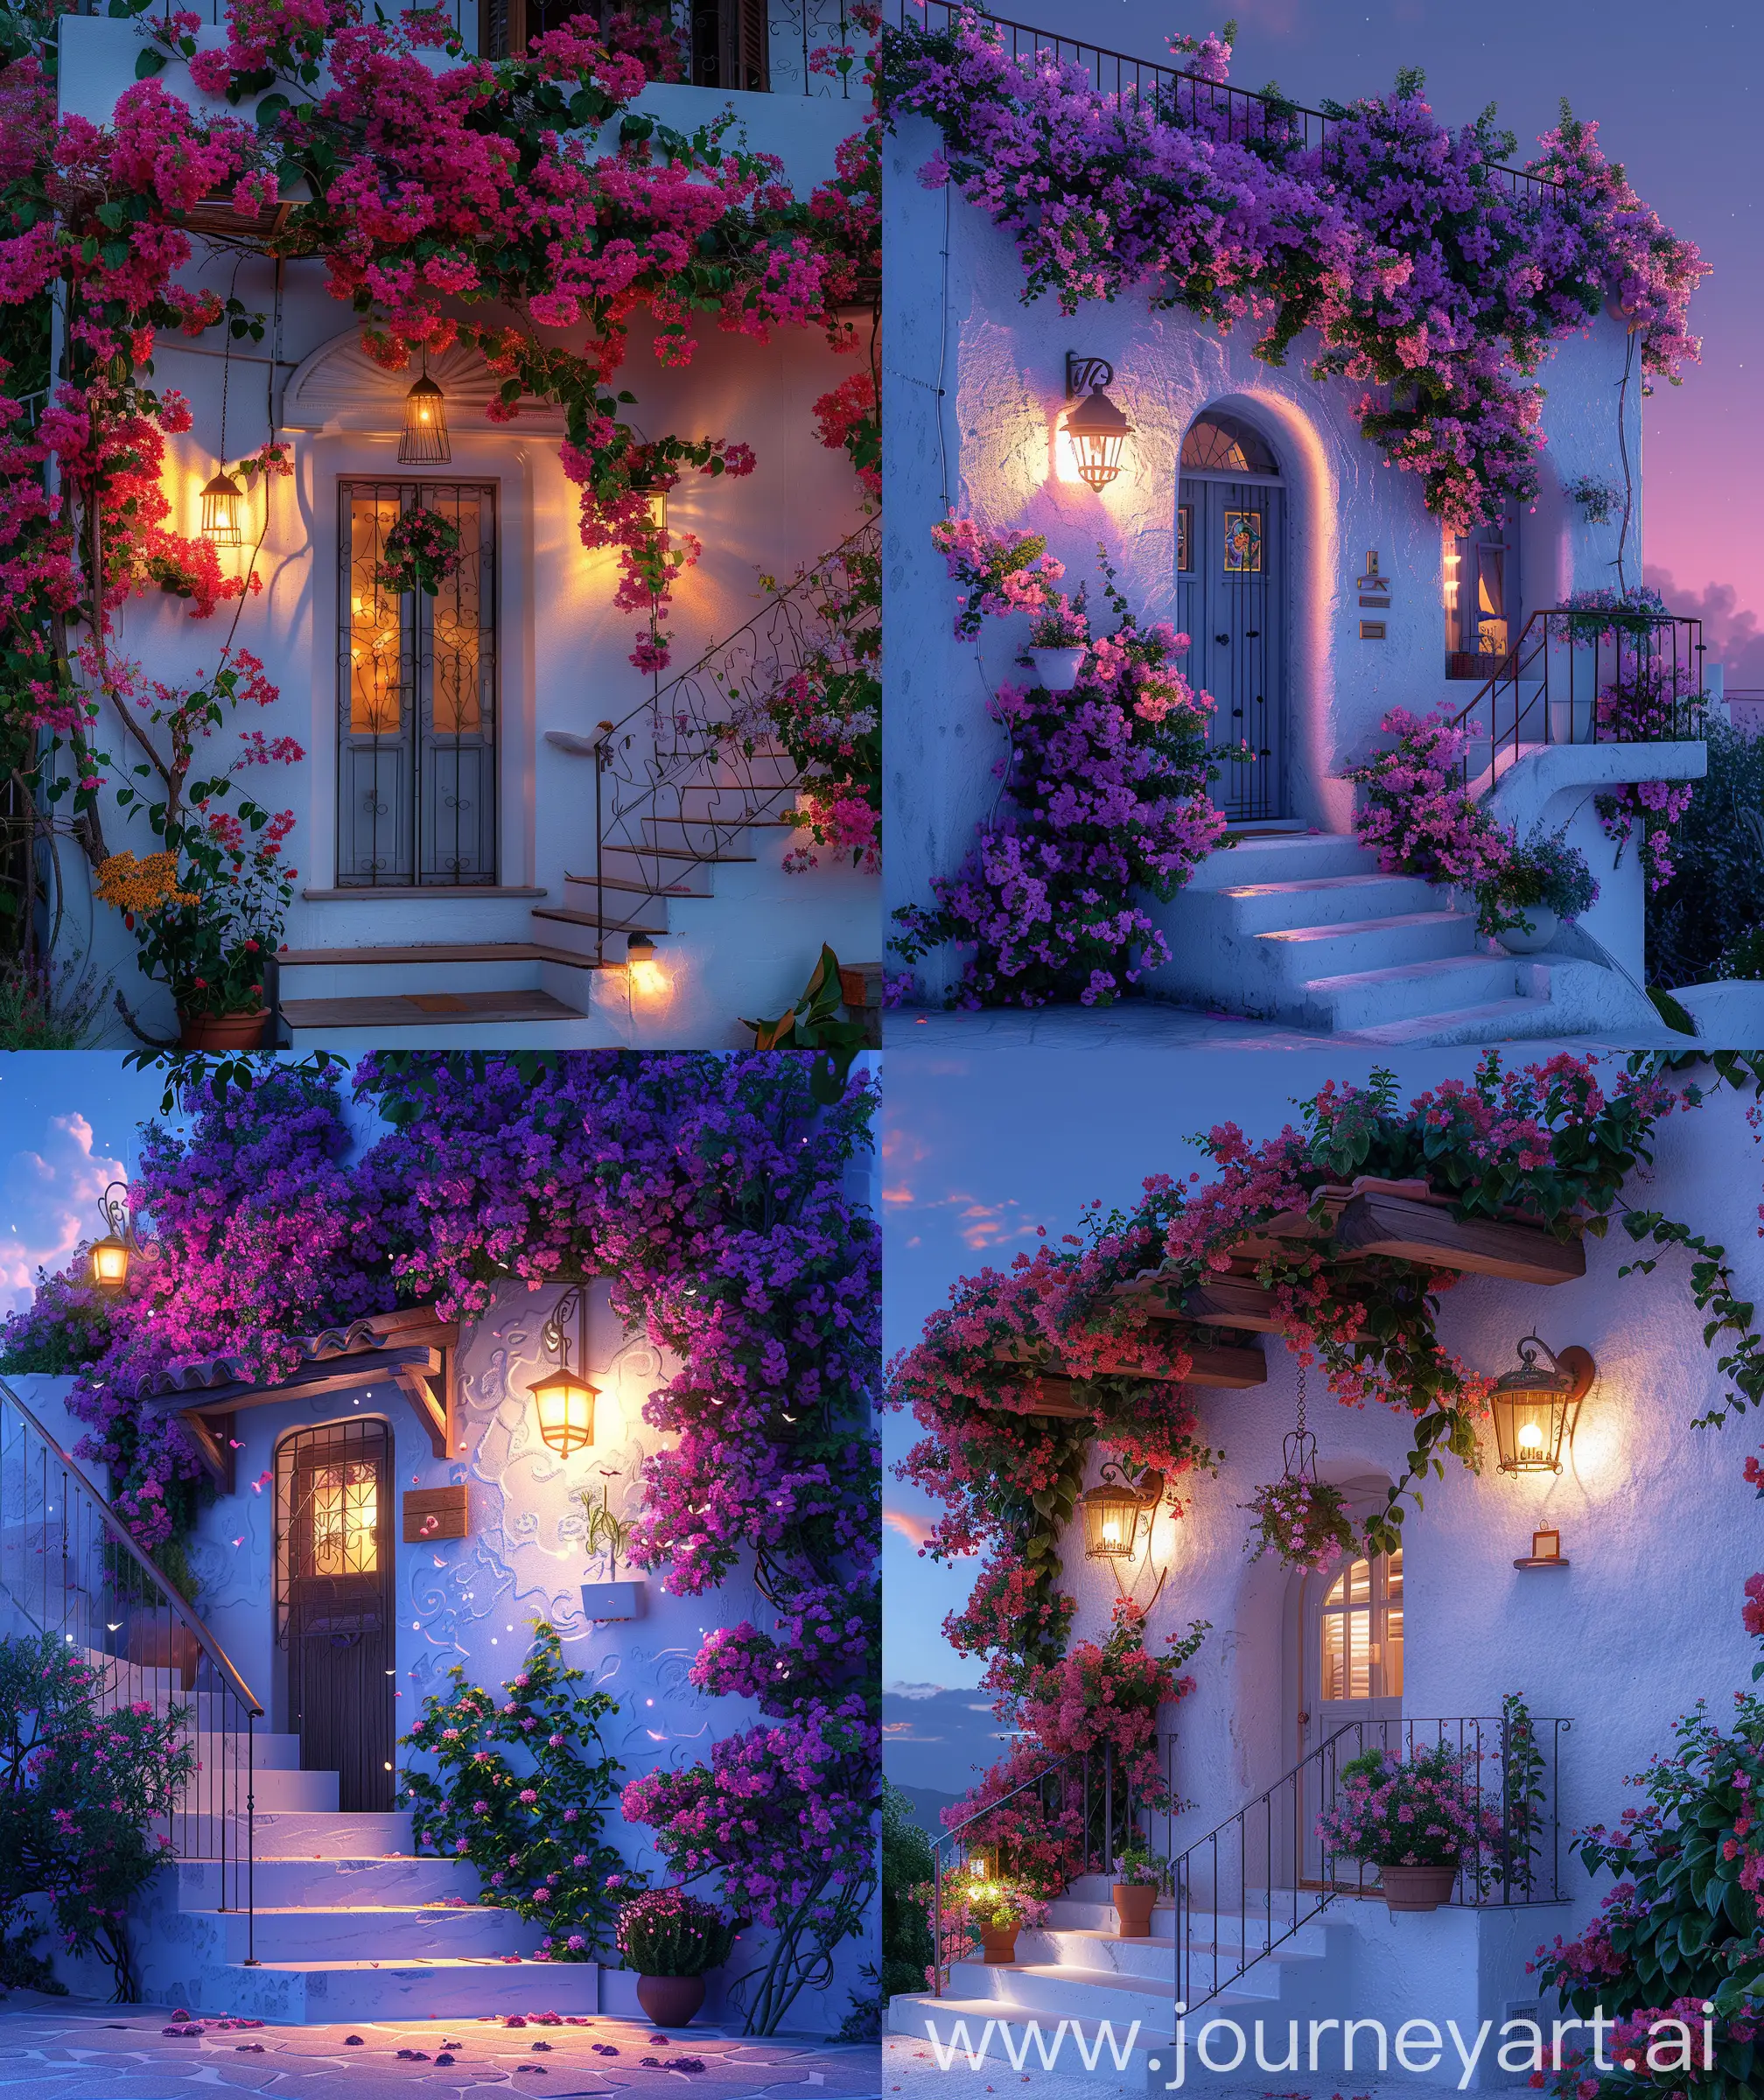 Enchanting-AnimeStyle-Evening-Front-View-of-White-House-Adorned-with-Bougainvillea-Flowers-and-Hanging-Wall-Lamp